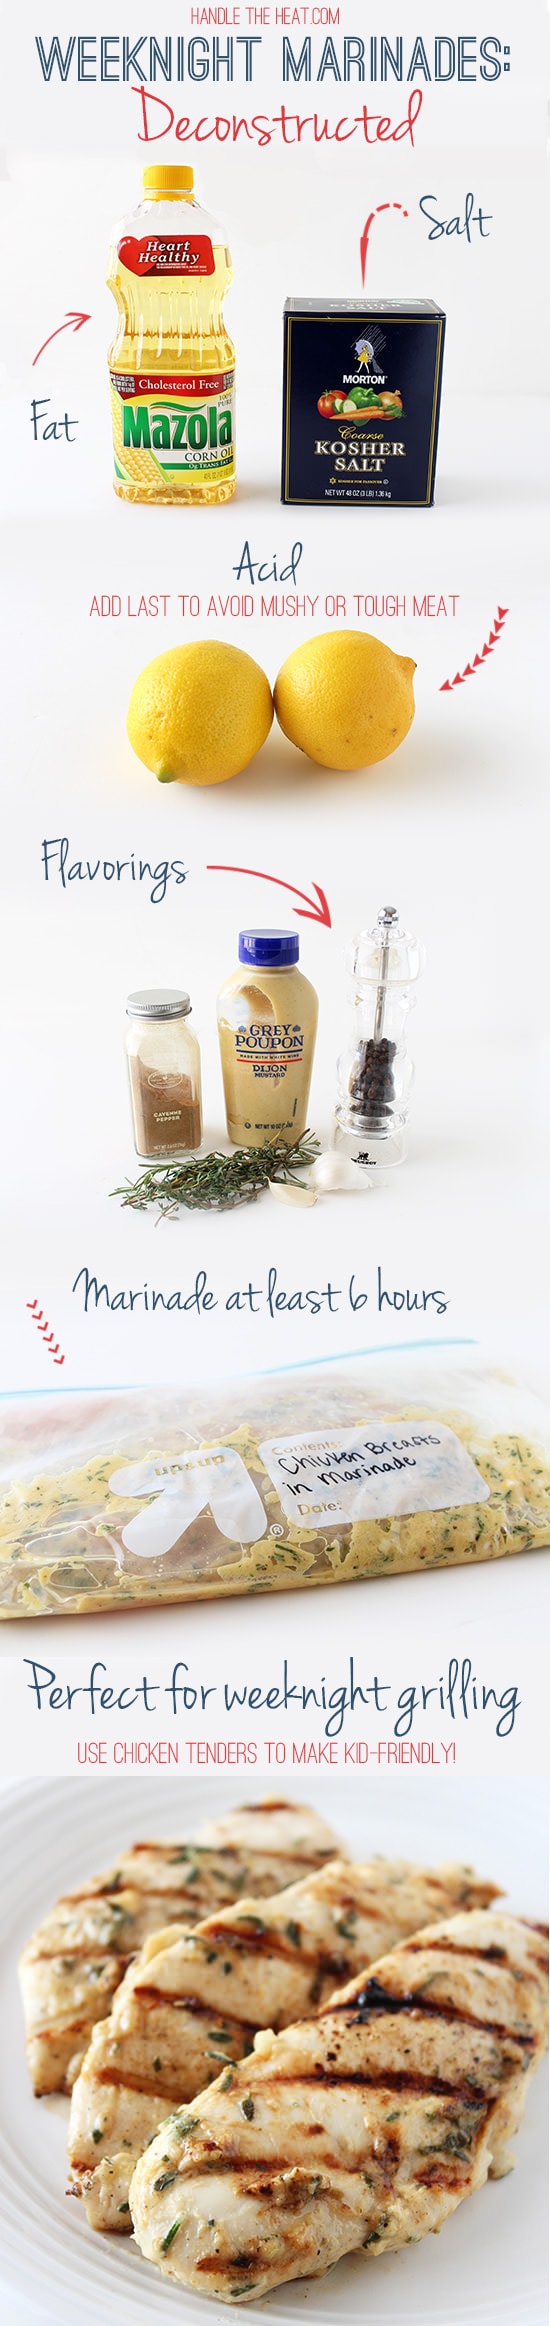 Guide to Weeknight Marinades